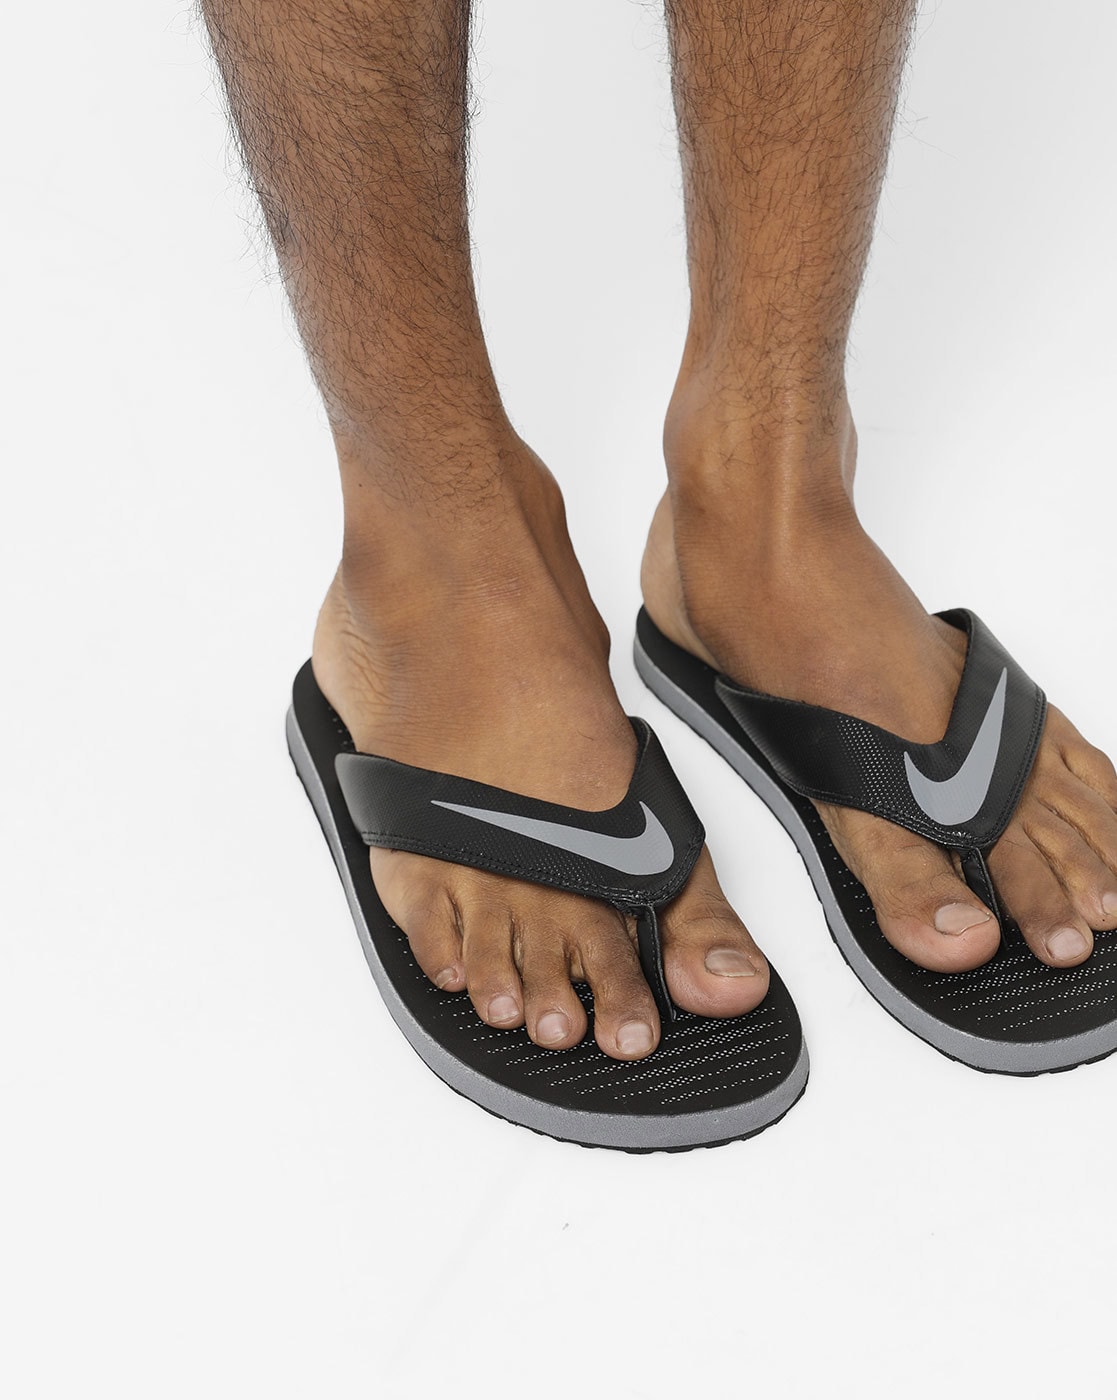 Nike CHROMA THONG 5 Slippers - Buy Nike CHROMA THONG 5 Slippers Online at  Best Price - Shop Online for Footwears in India | Flipkart.com - Price  History